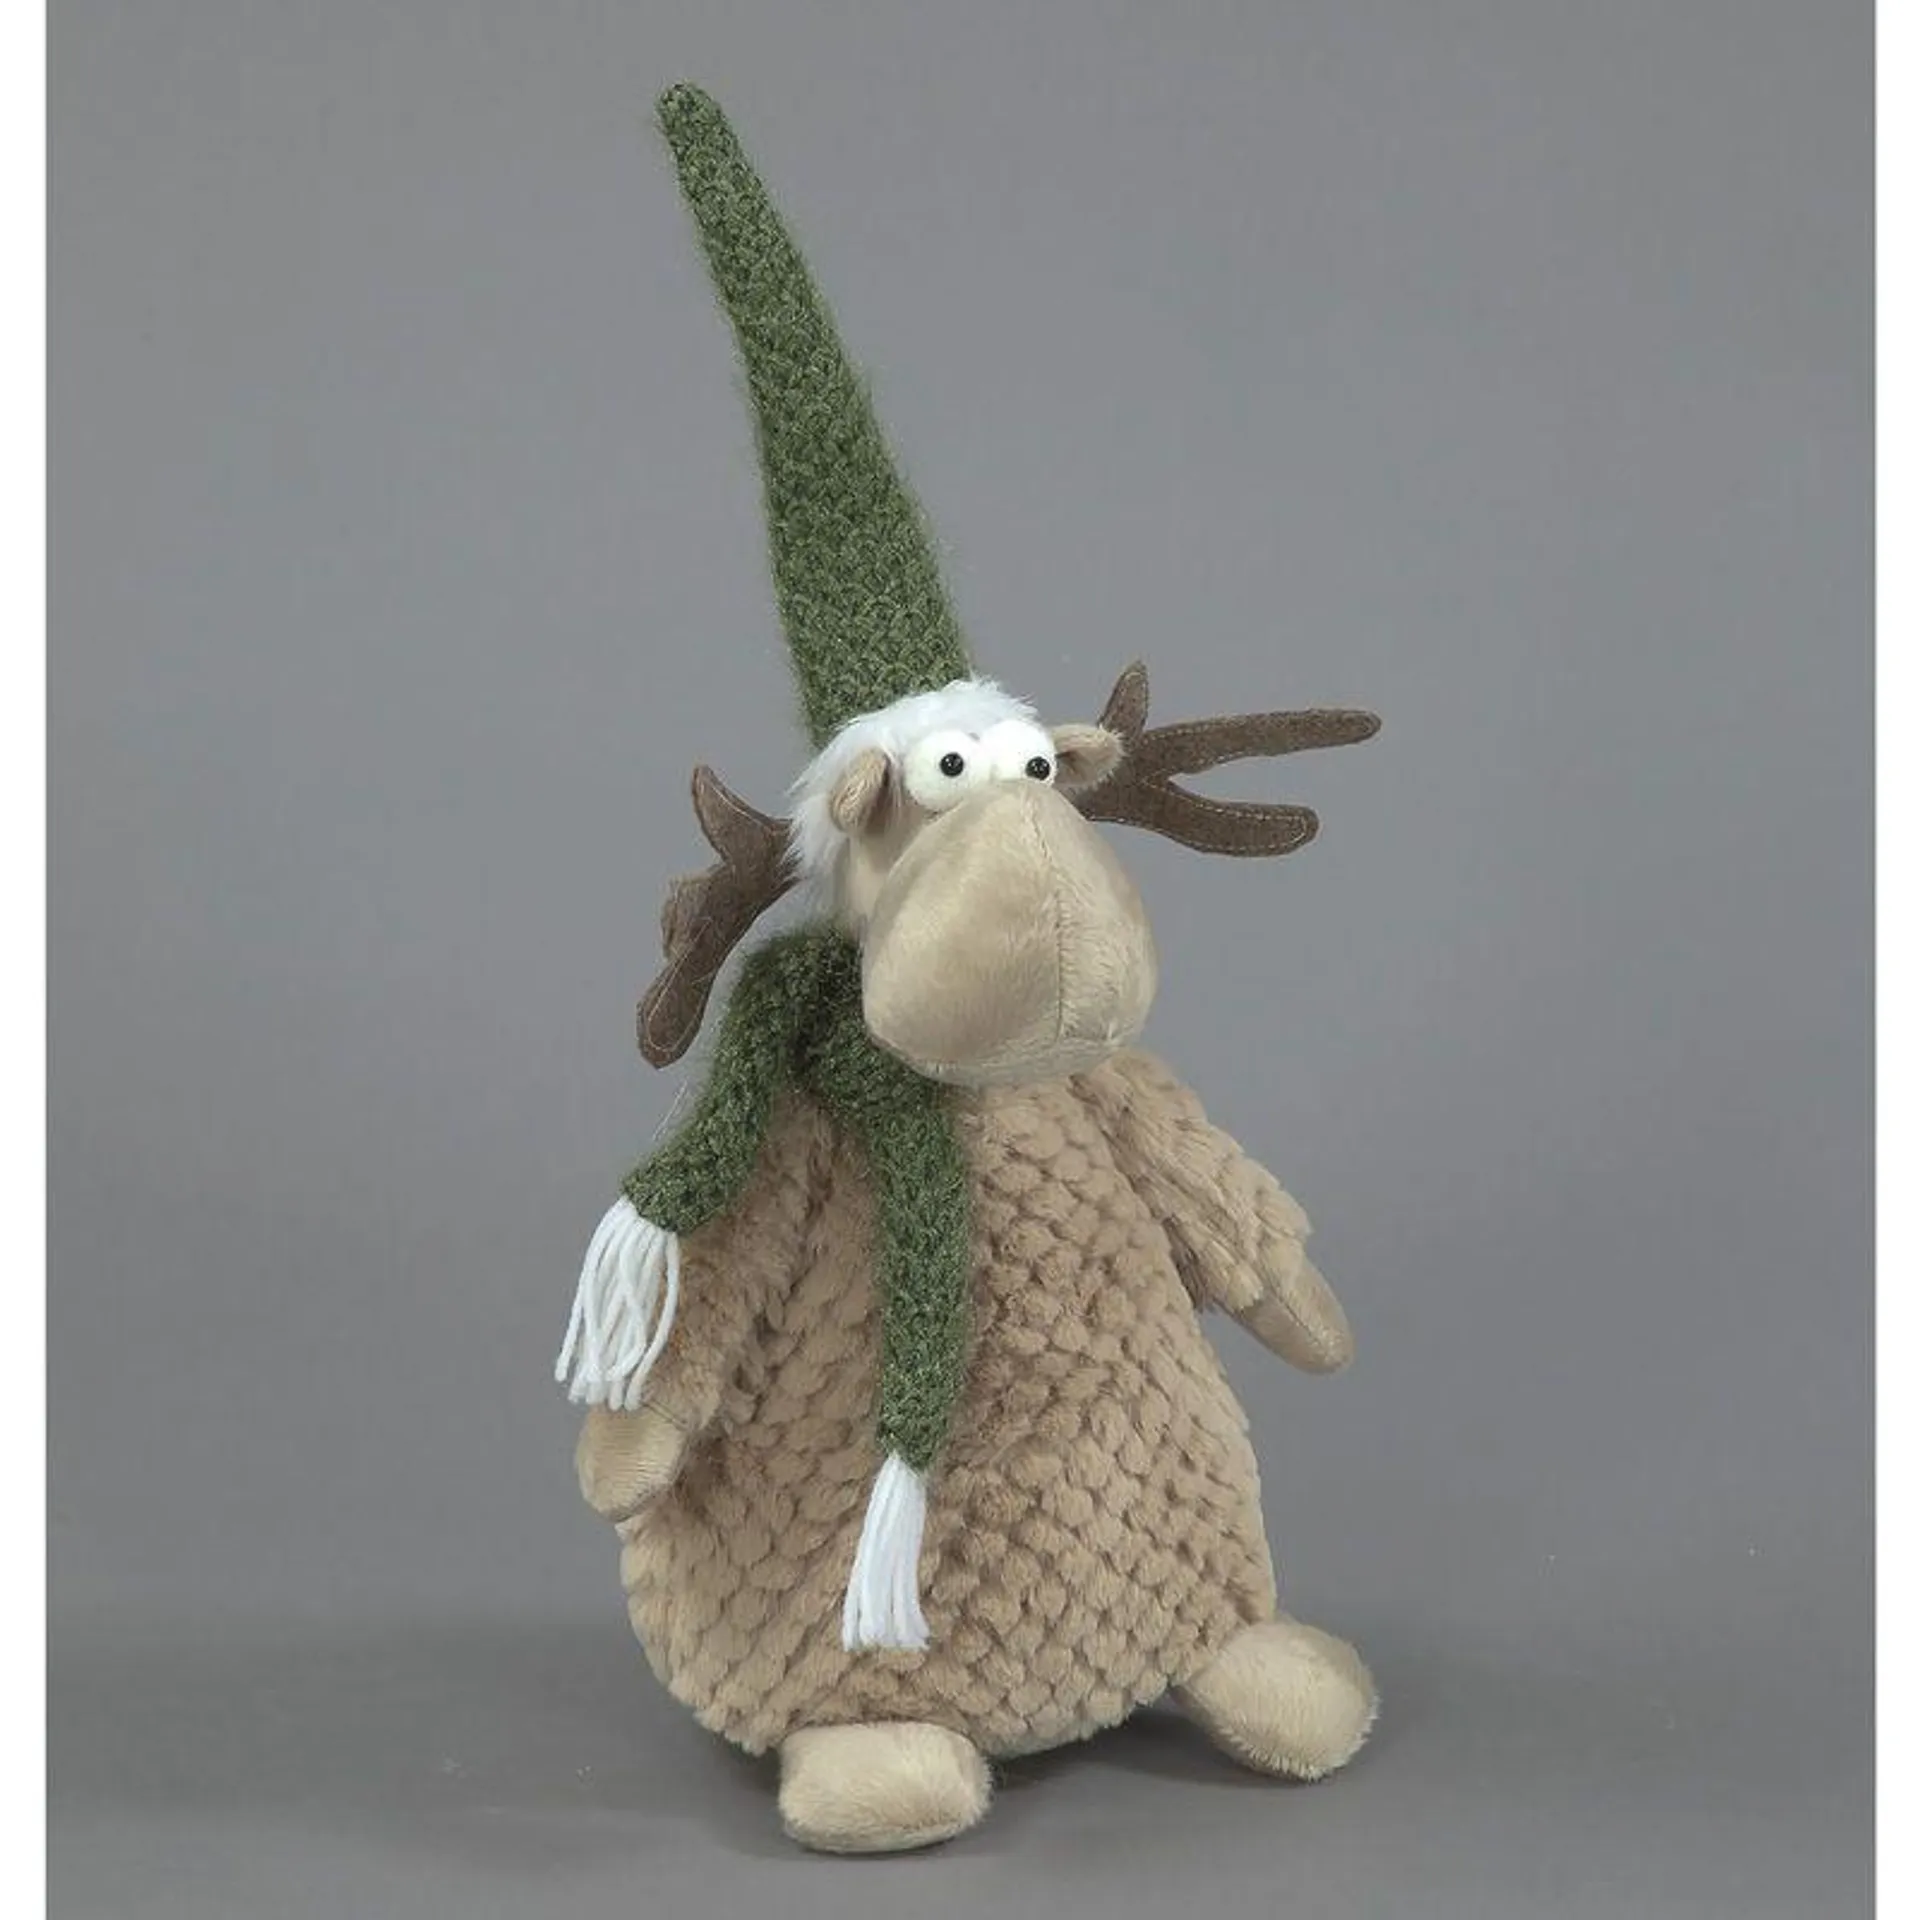 41cm Plush Reindeer with Green hat and Scarf